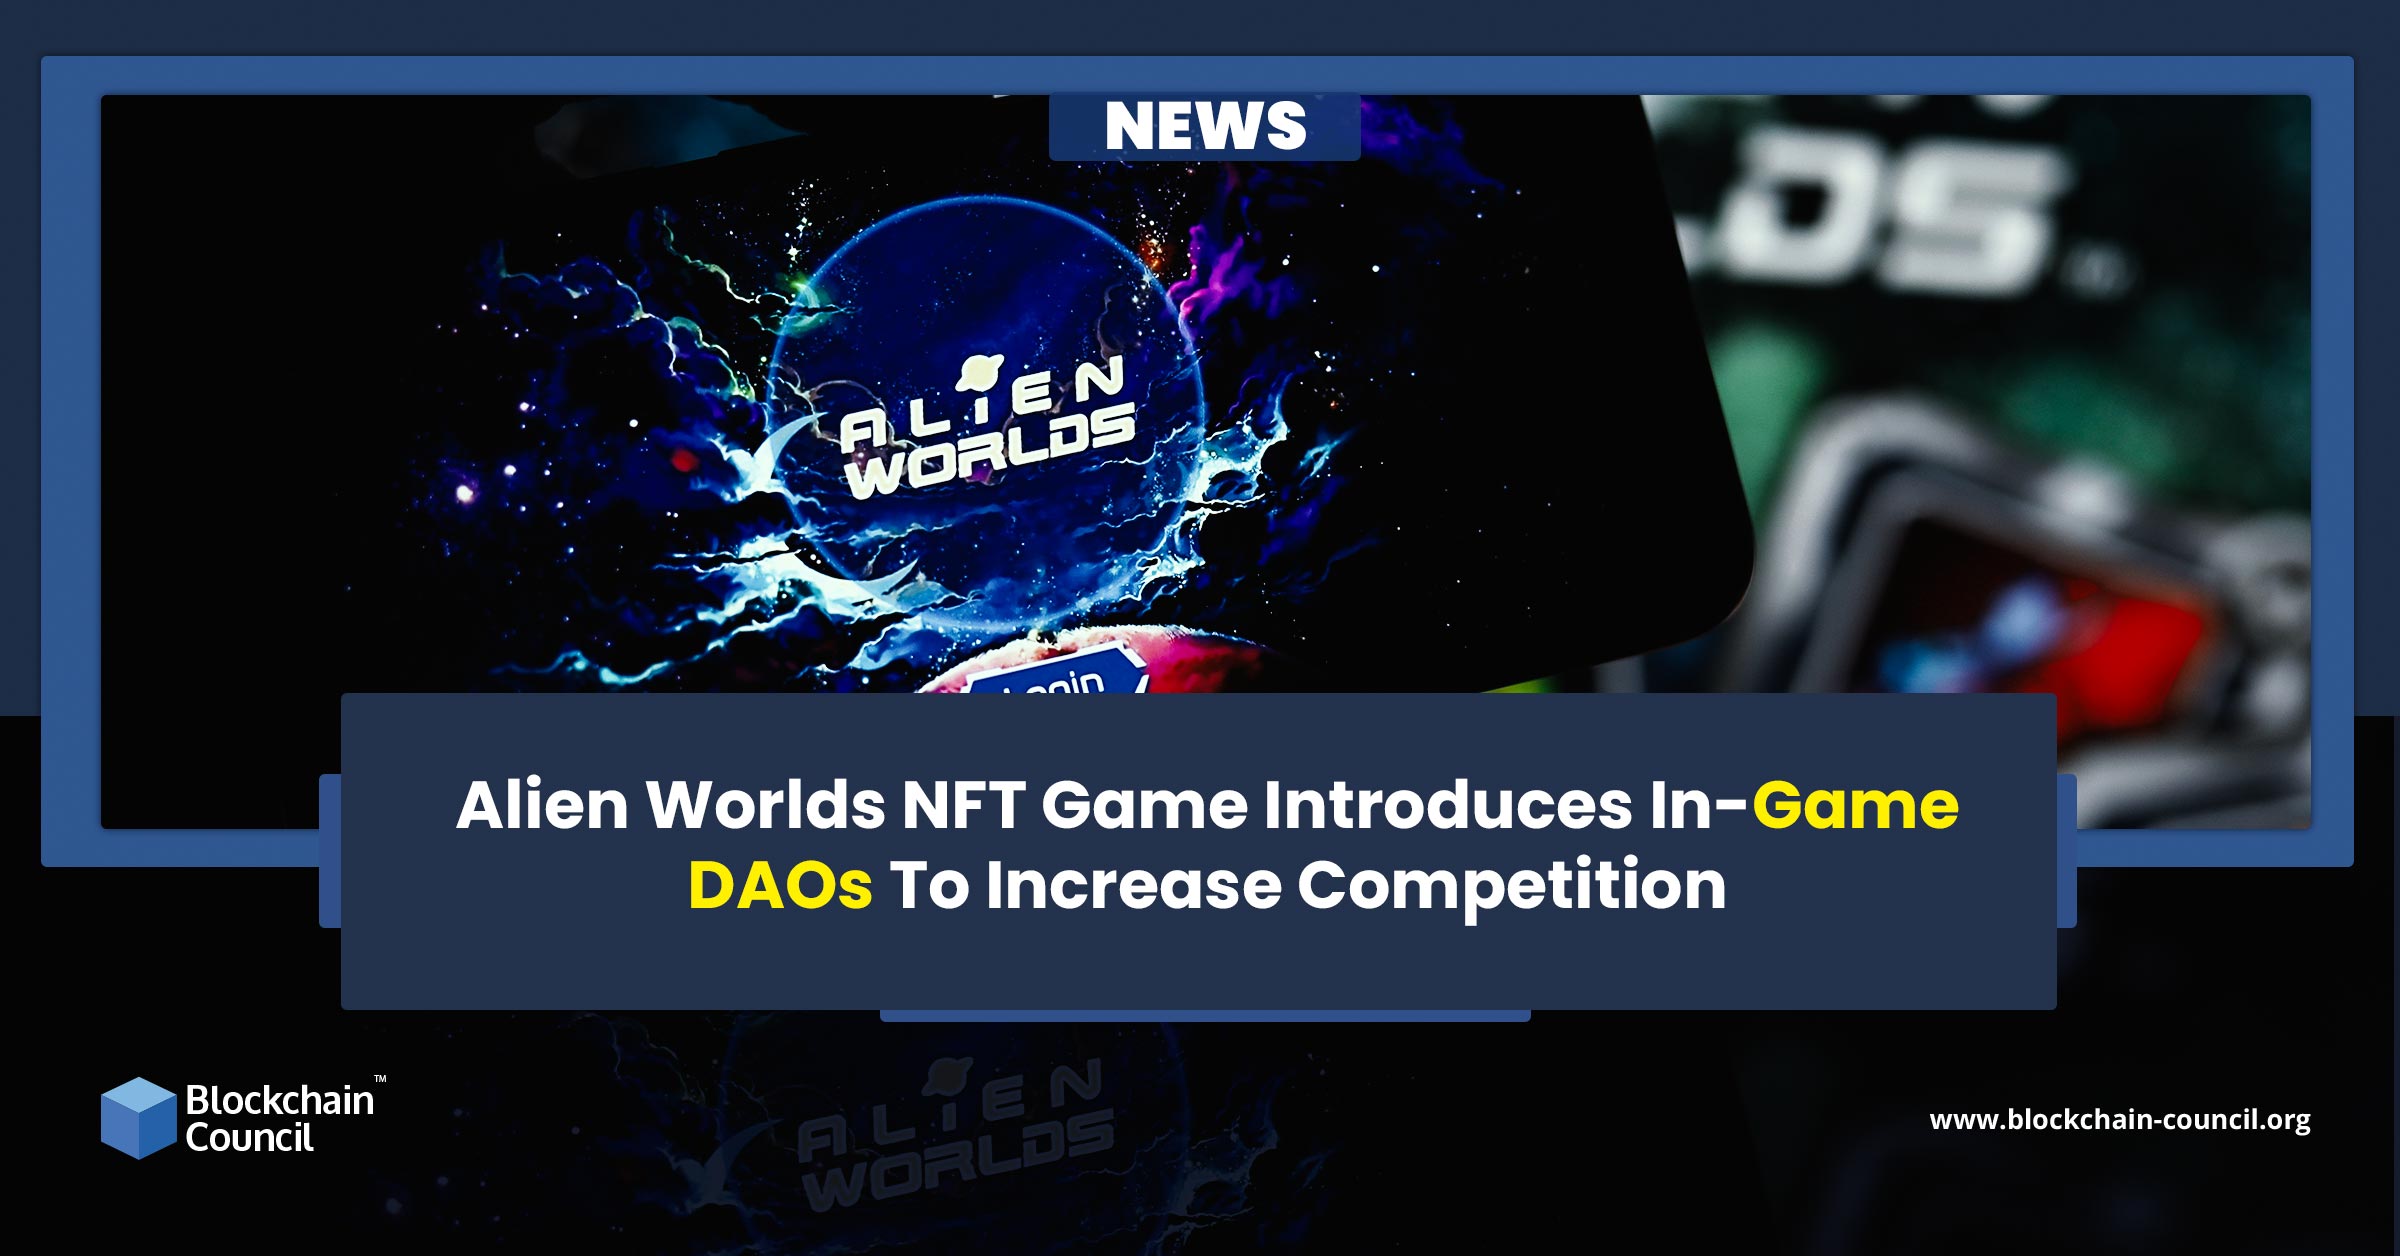 Alien Worlds NFT Game Introduces In-Game DAOs To Increase Competition